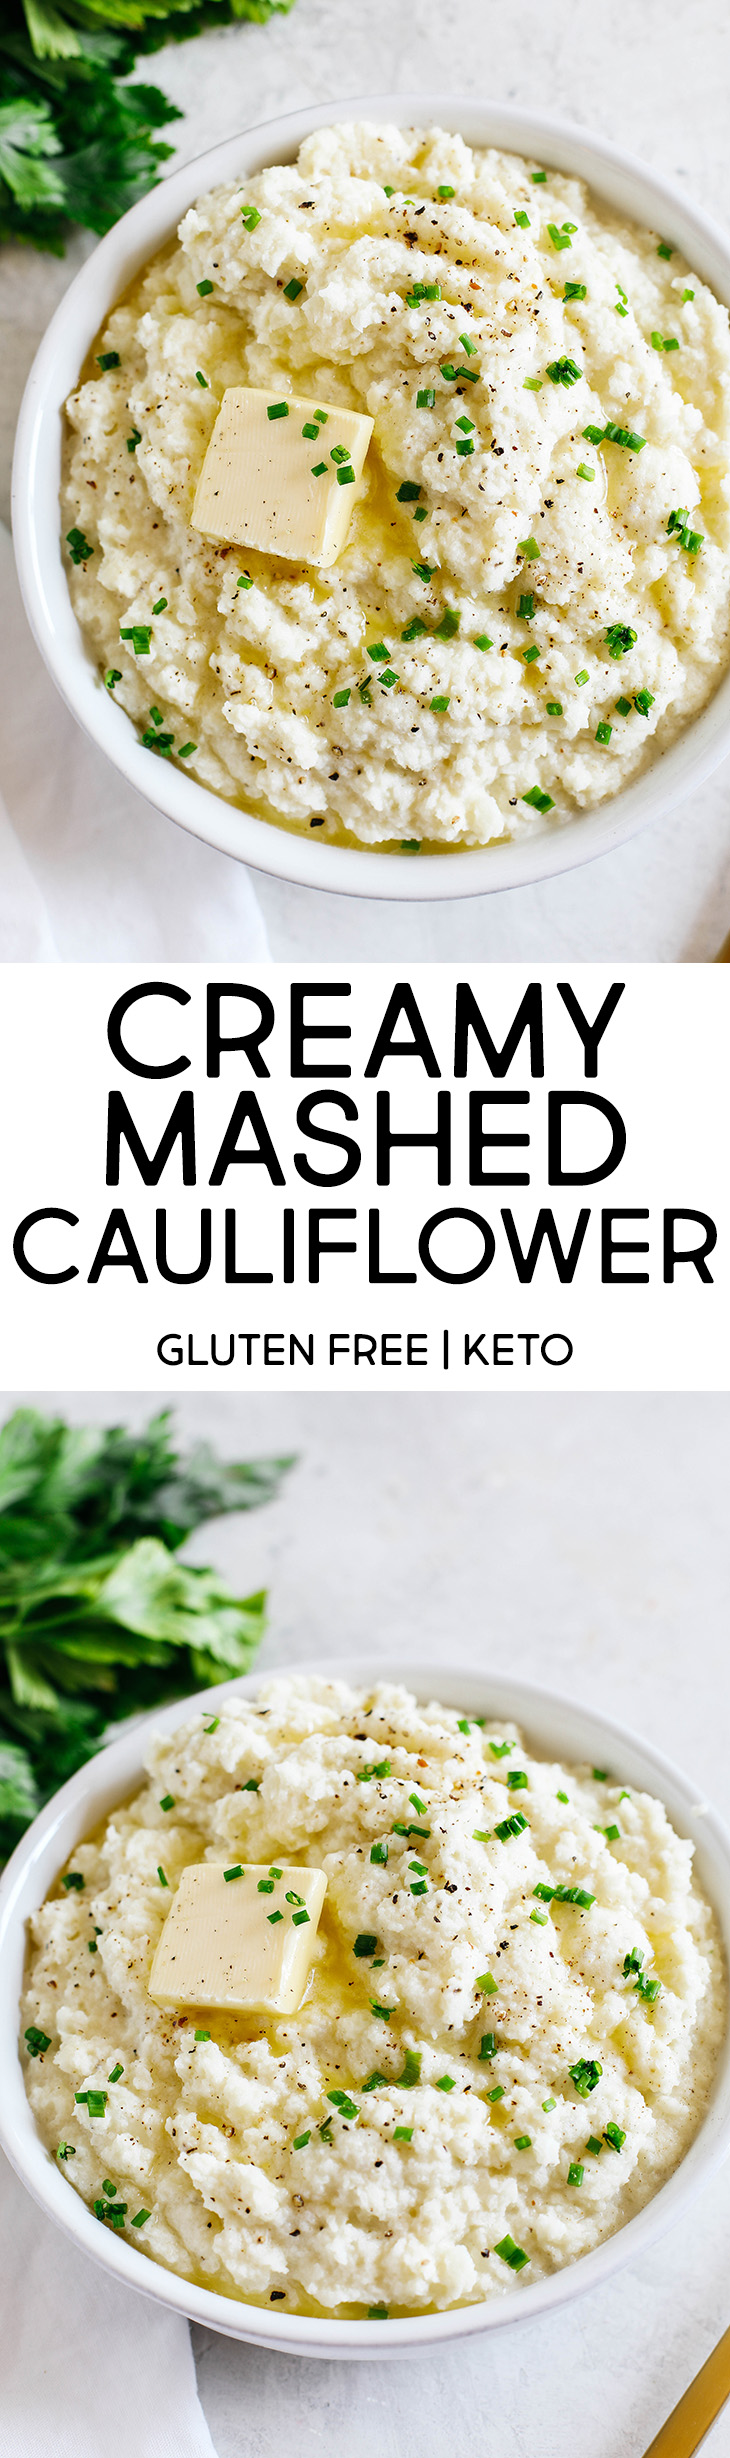 This EASY Mashed Cauliflower is creamy, delicious, and makes the perfect low carb, keto-friendly side dish easily made in under 15 minutes!